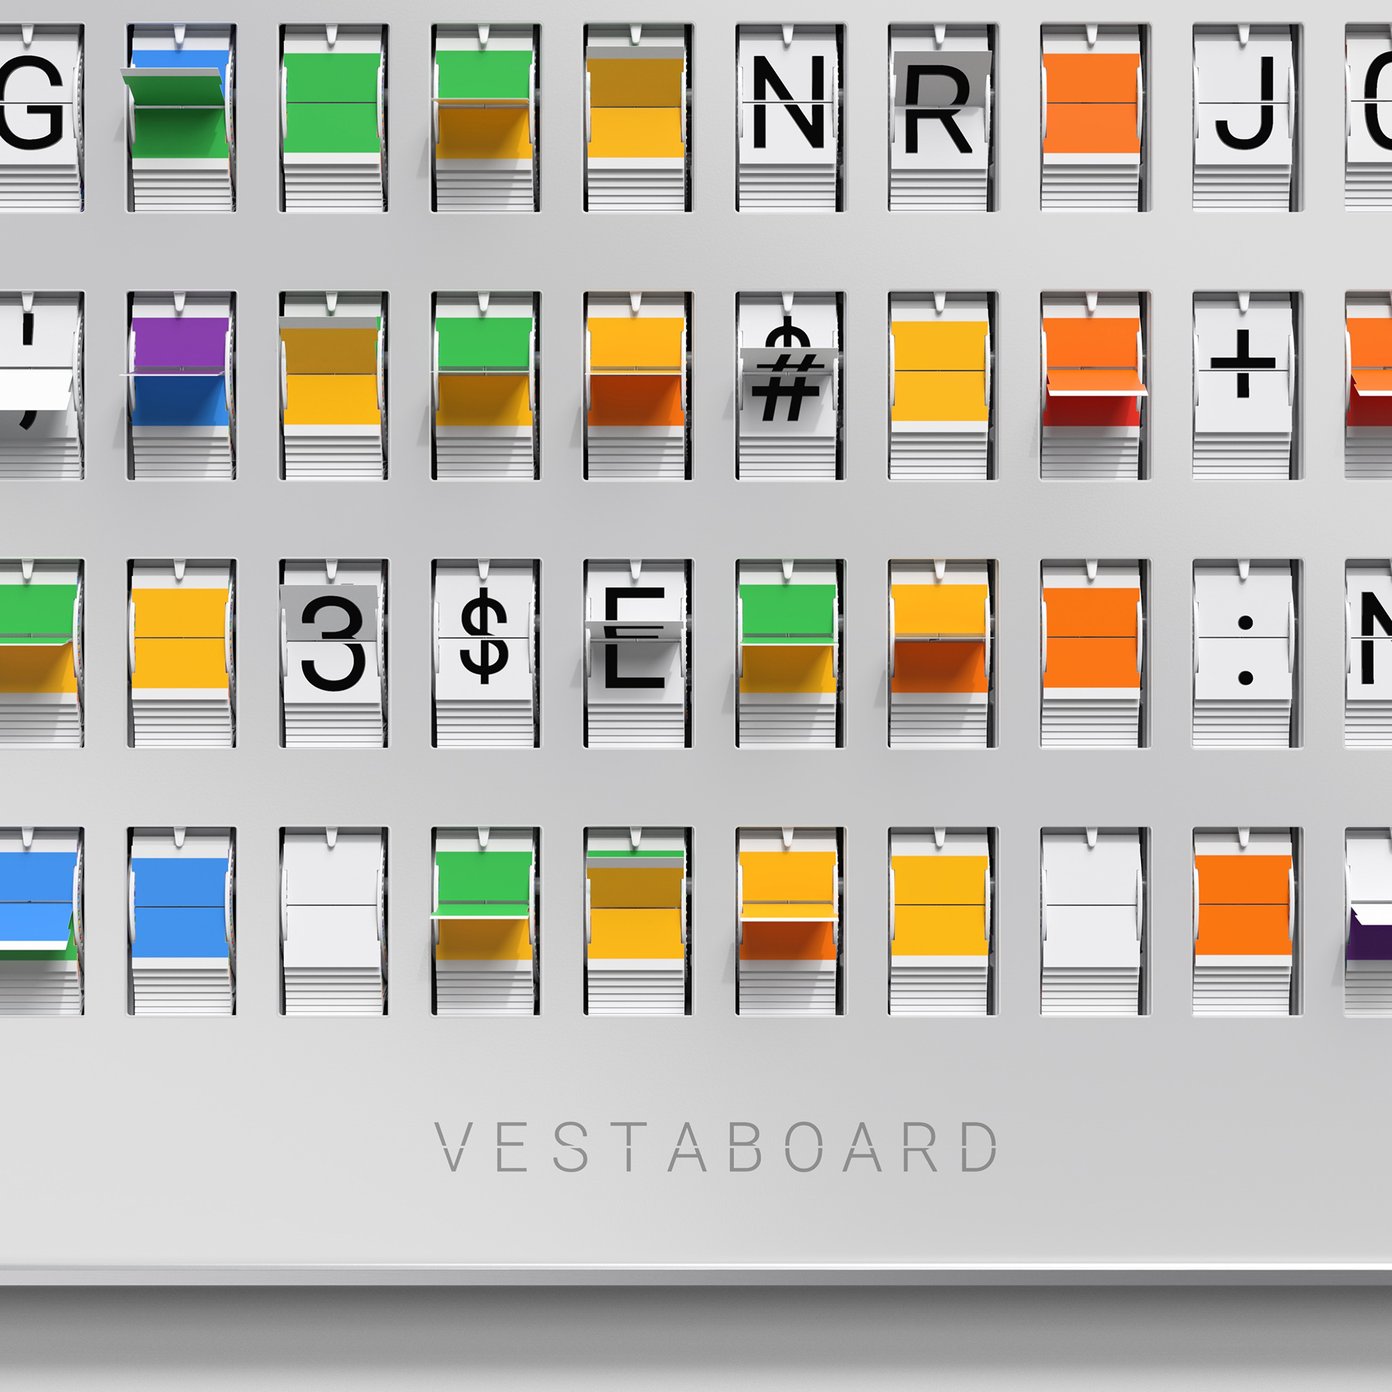 Vestaboard messaging display combines the best of the physical and